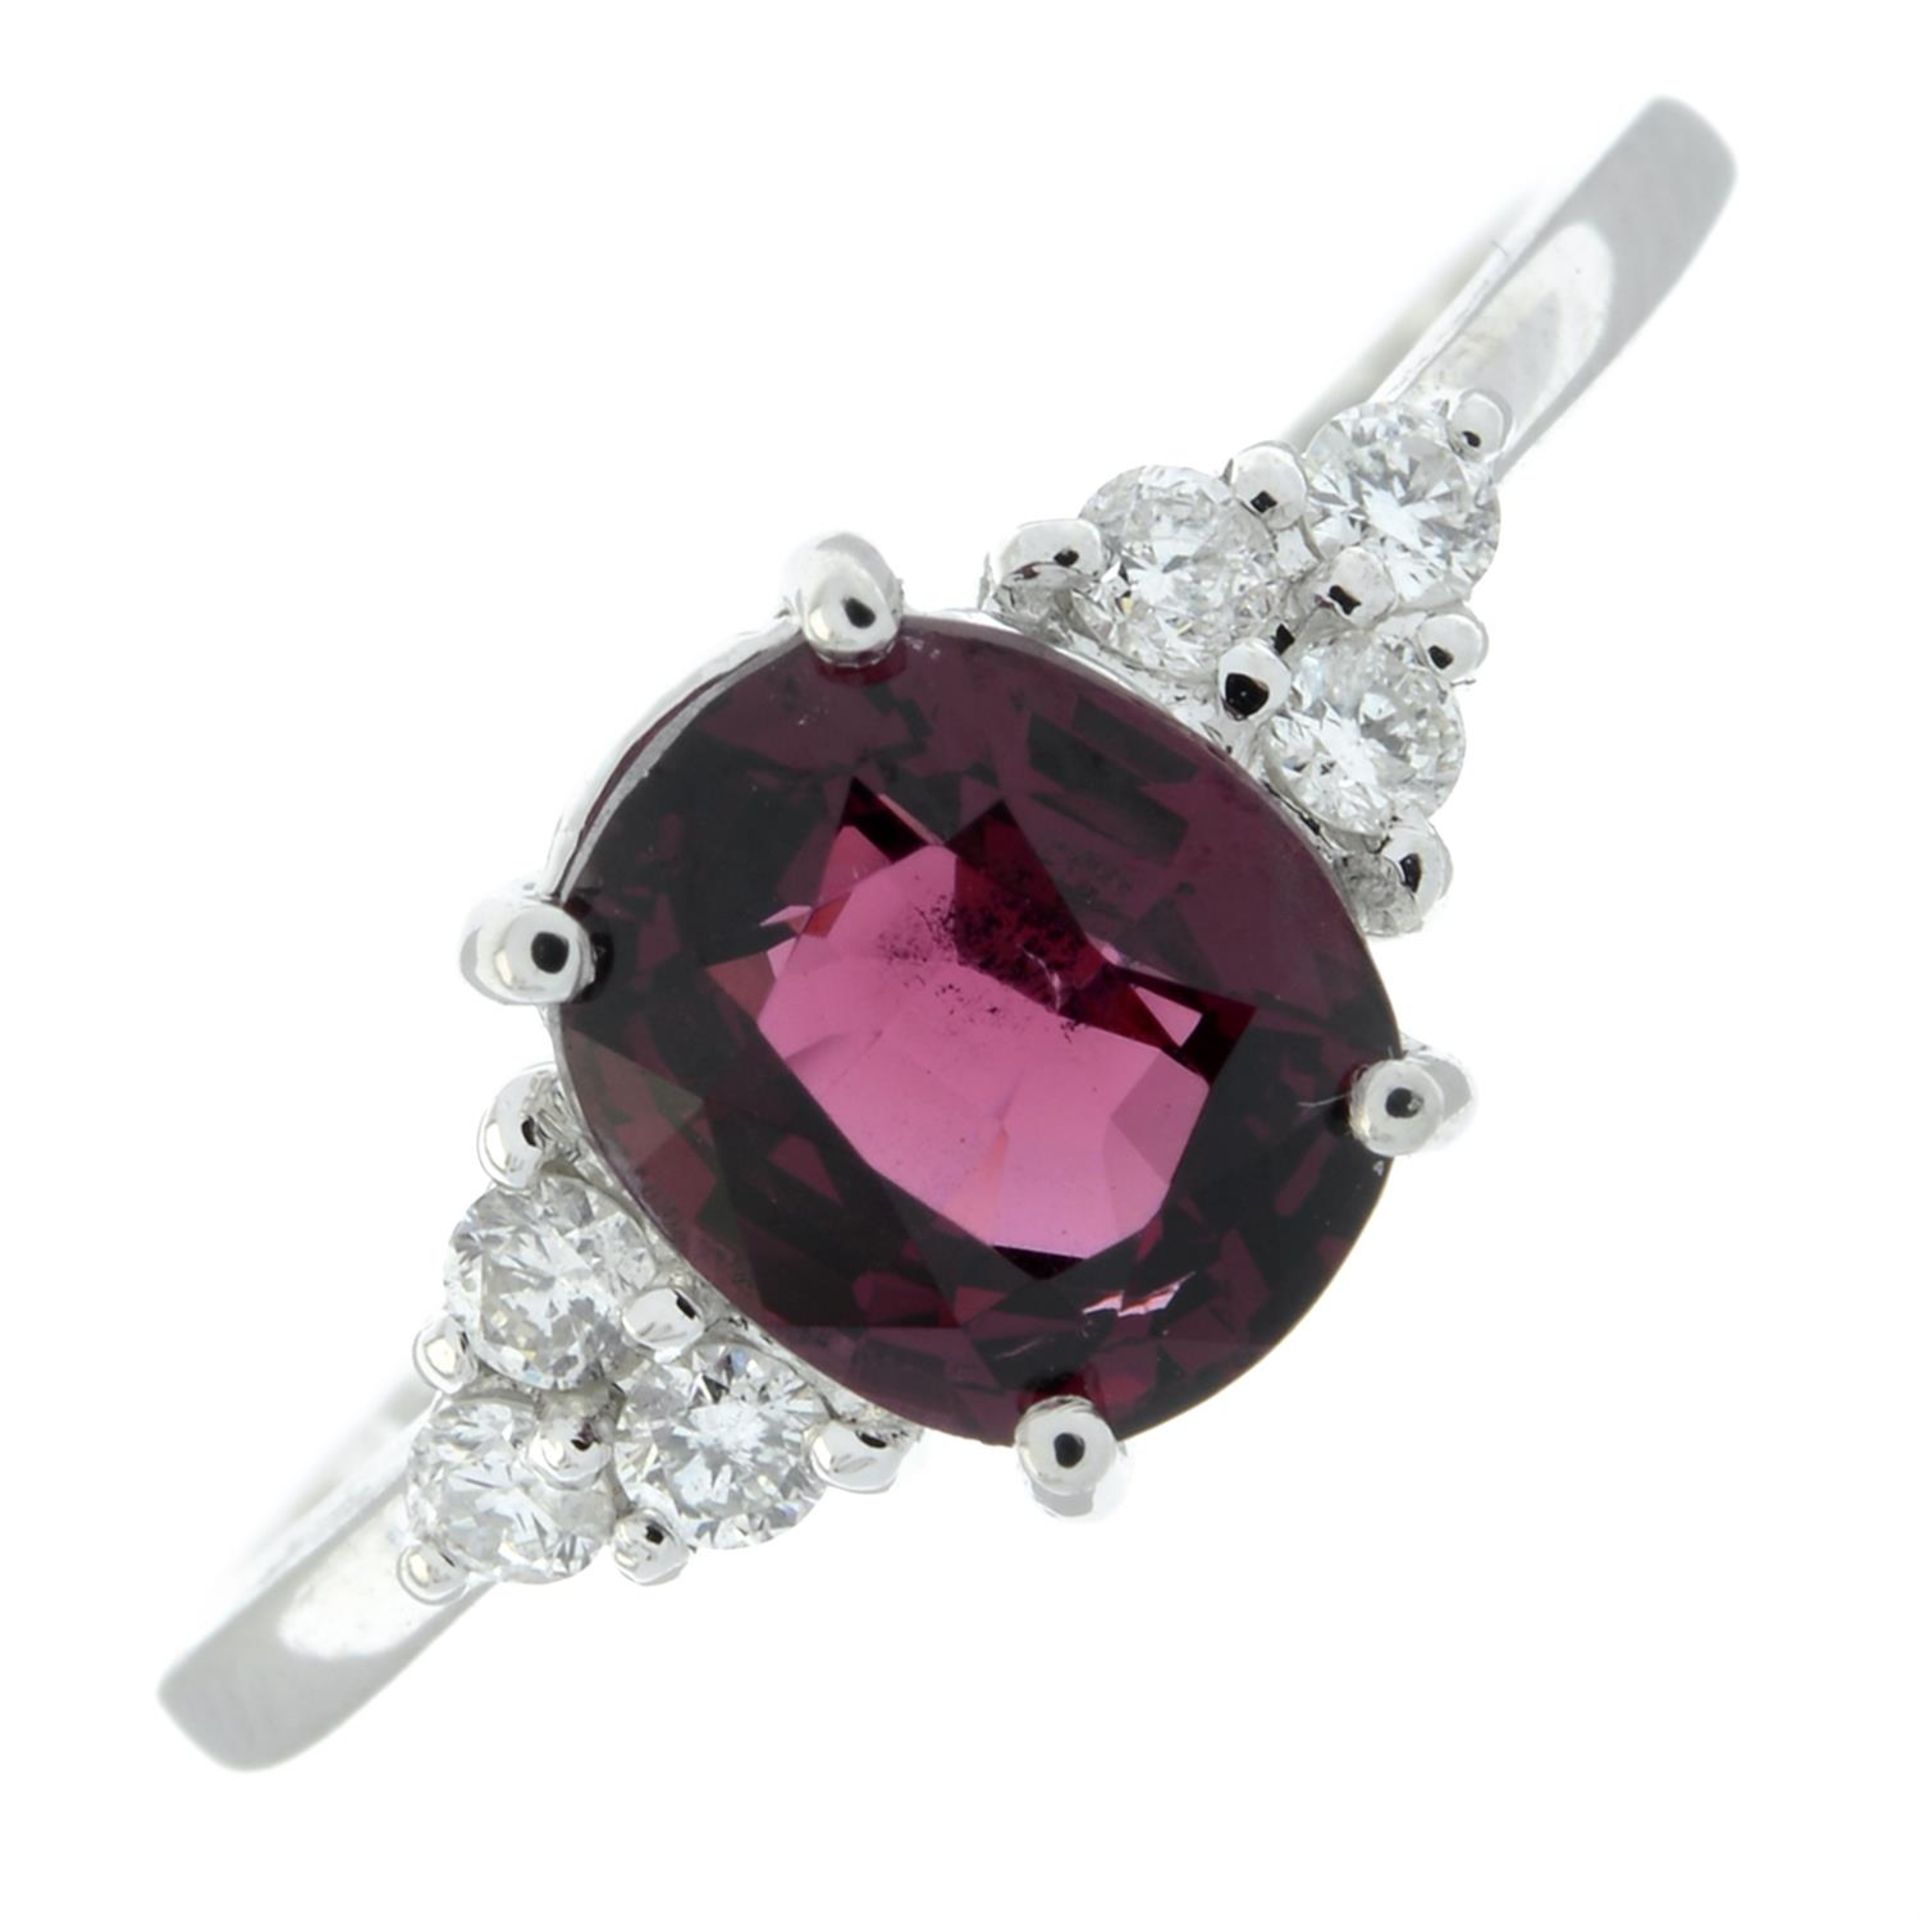 Red spinel and diamond ring - Image 2 of 5